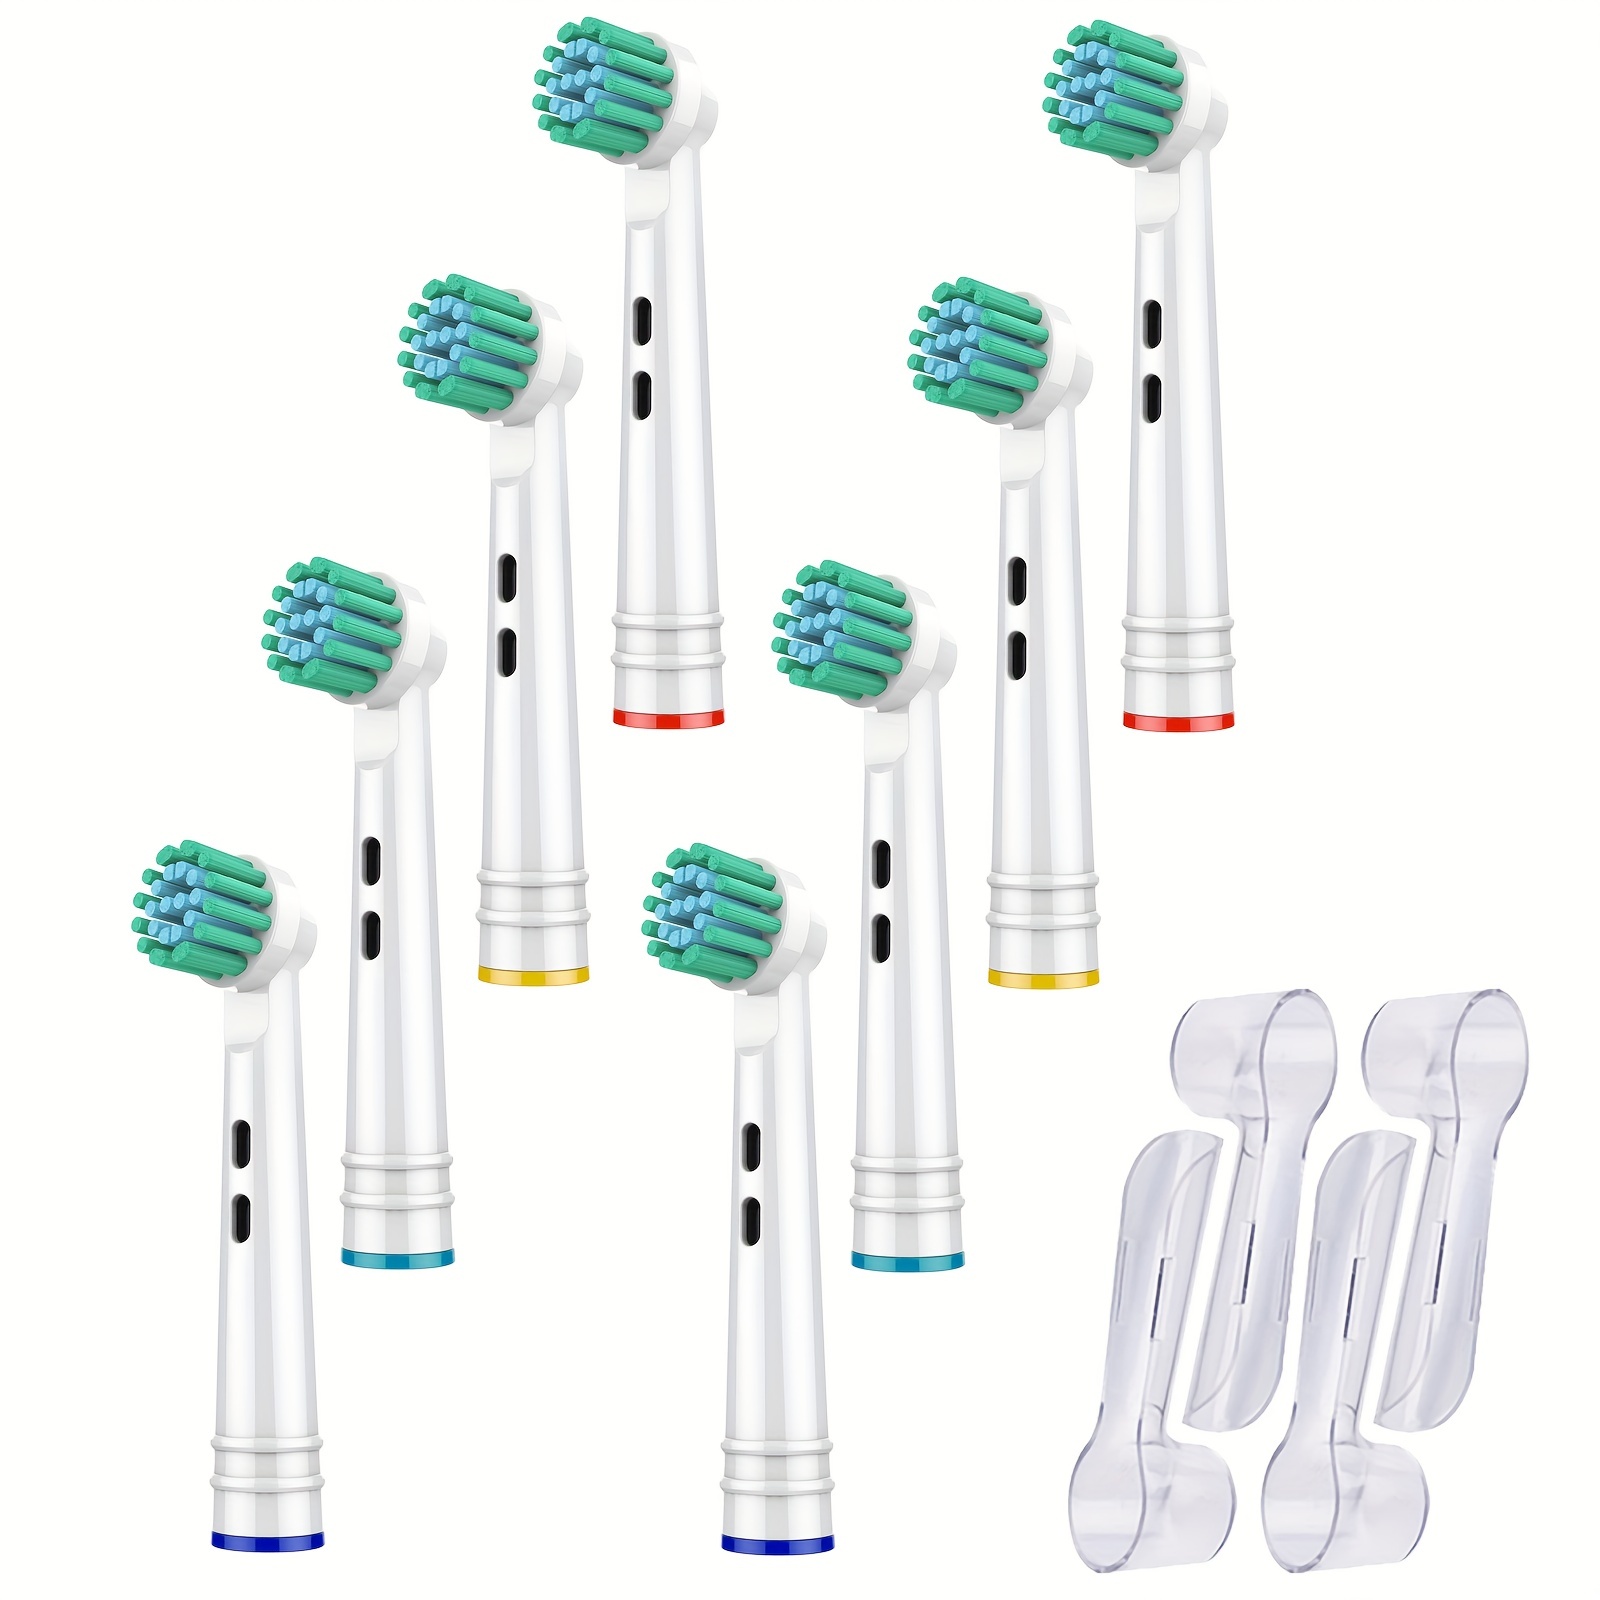 For Oral B Toothbrush Heads, Cross Clean Toothbrush Heads and